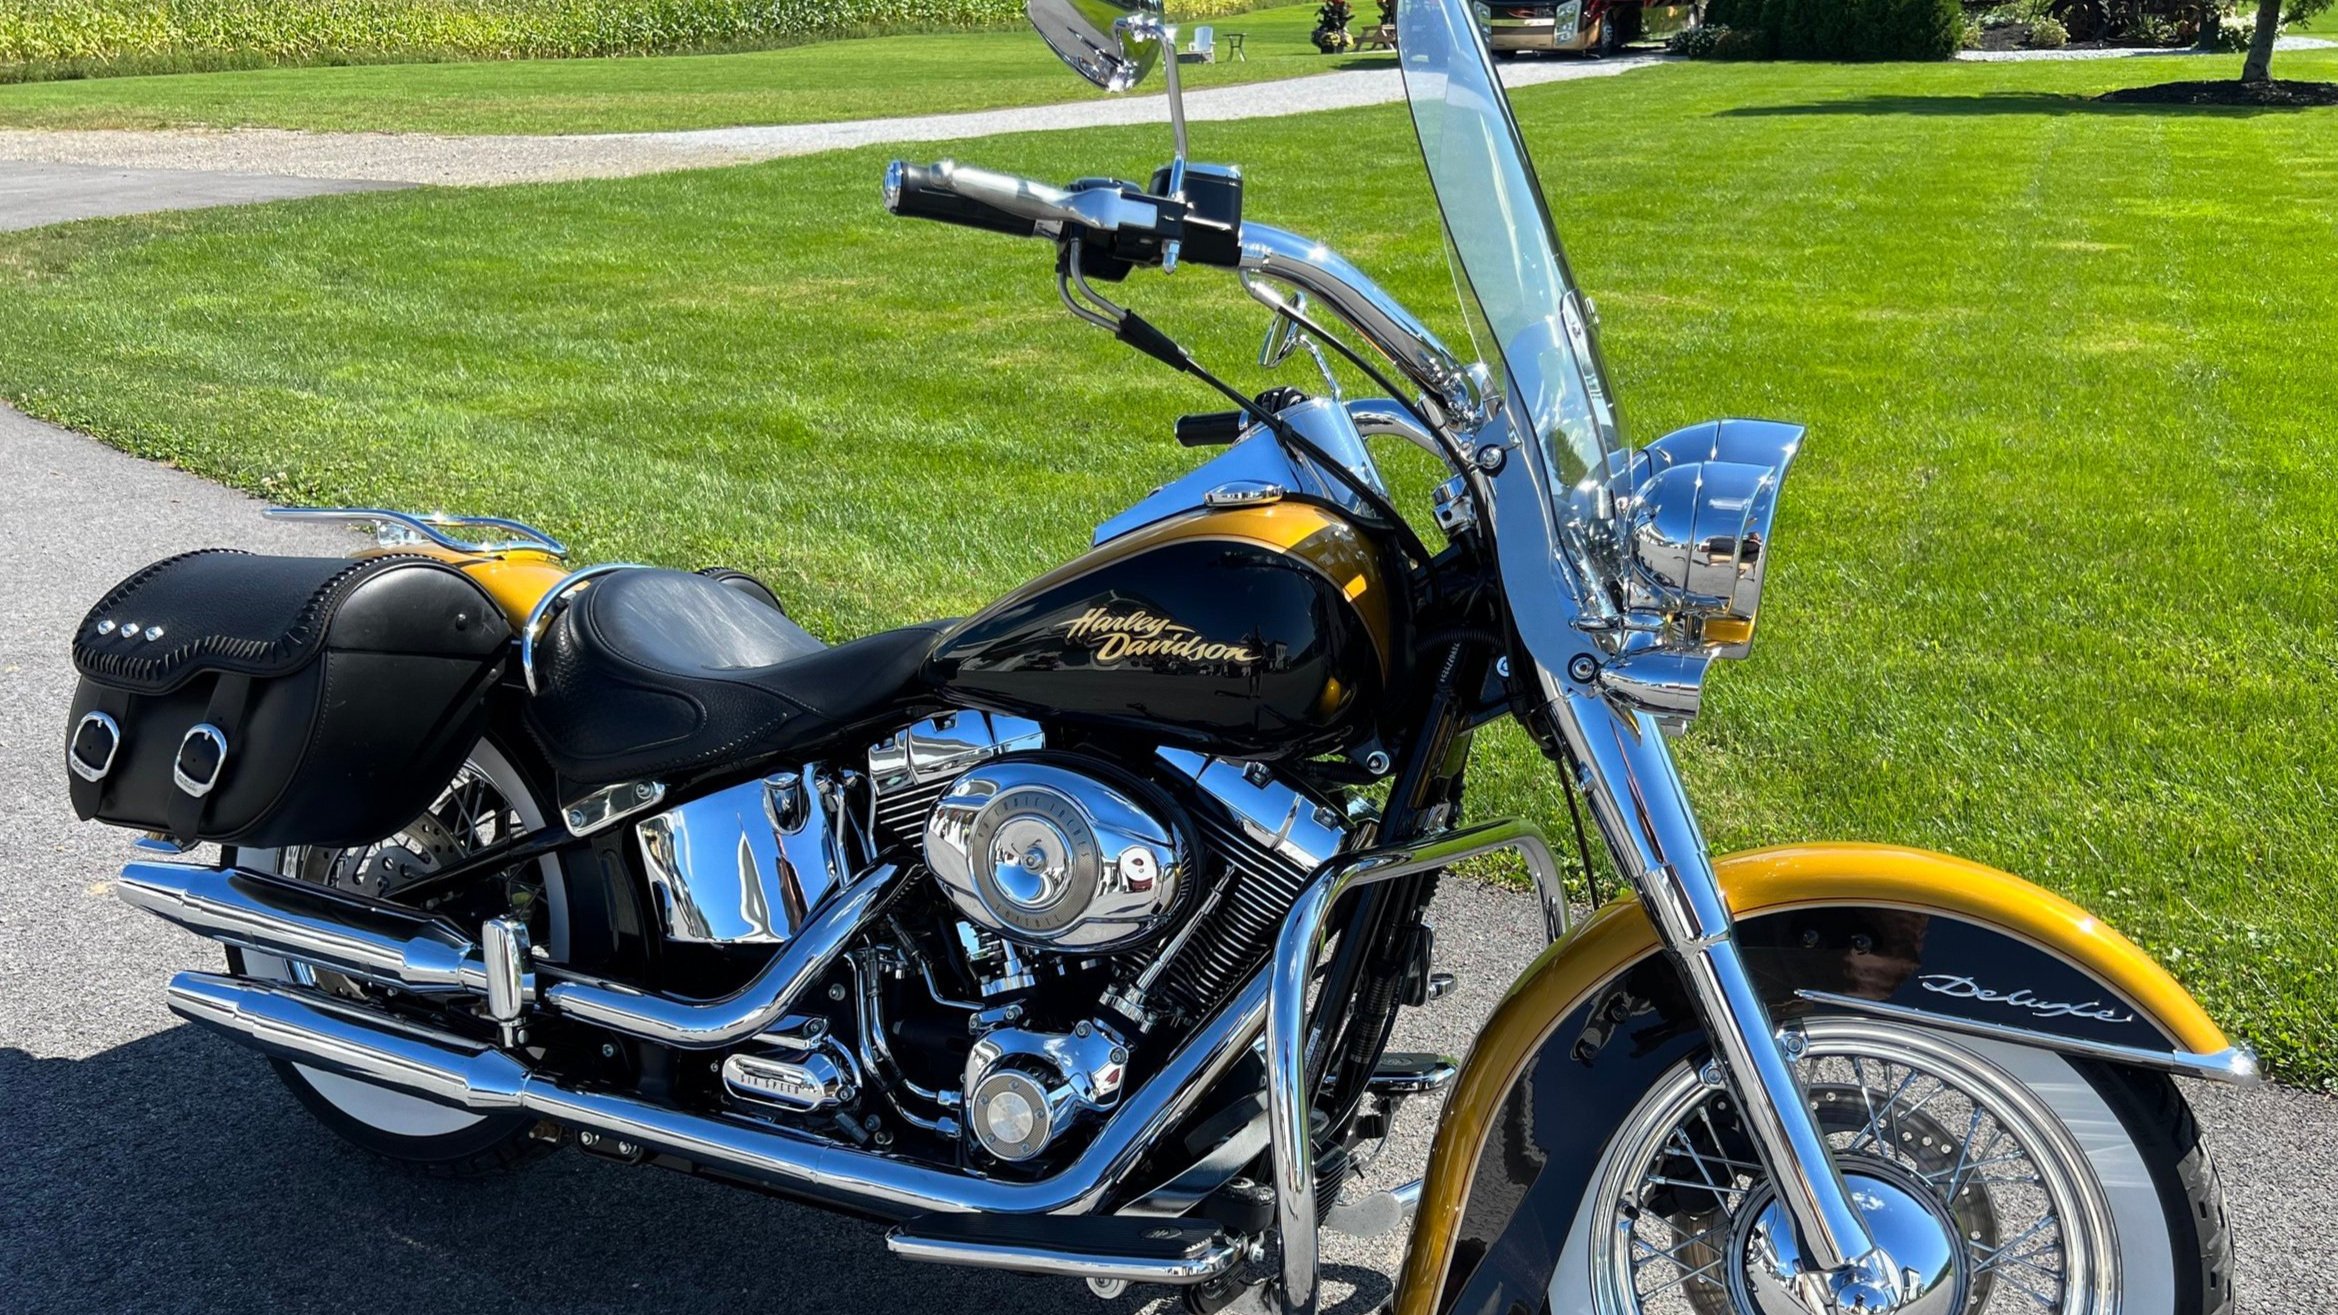 Spotless Motorcycle Professionally Detailed